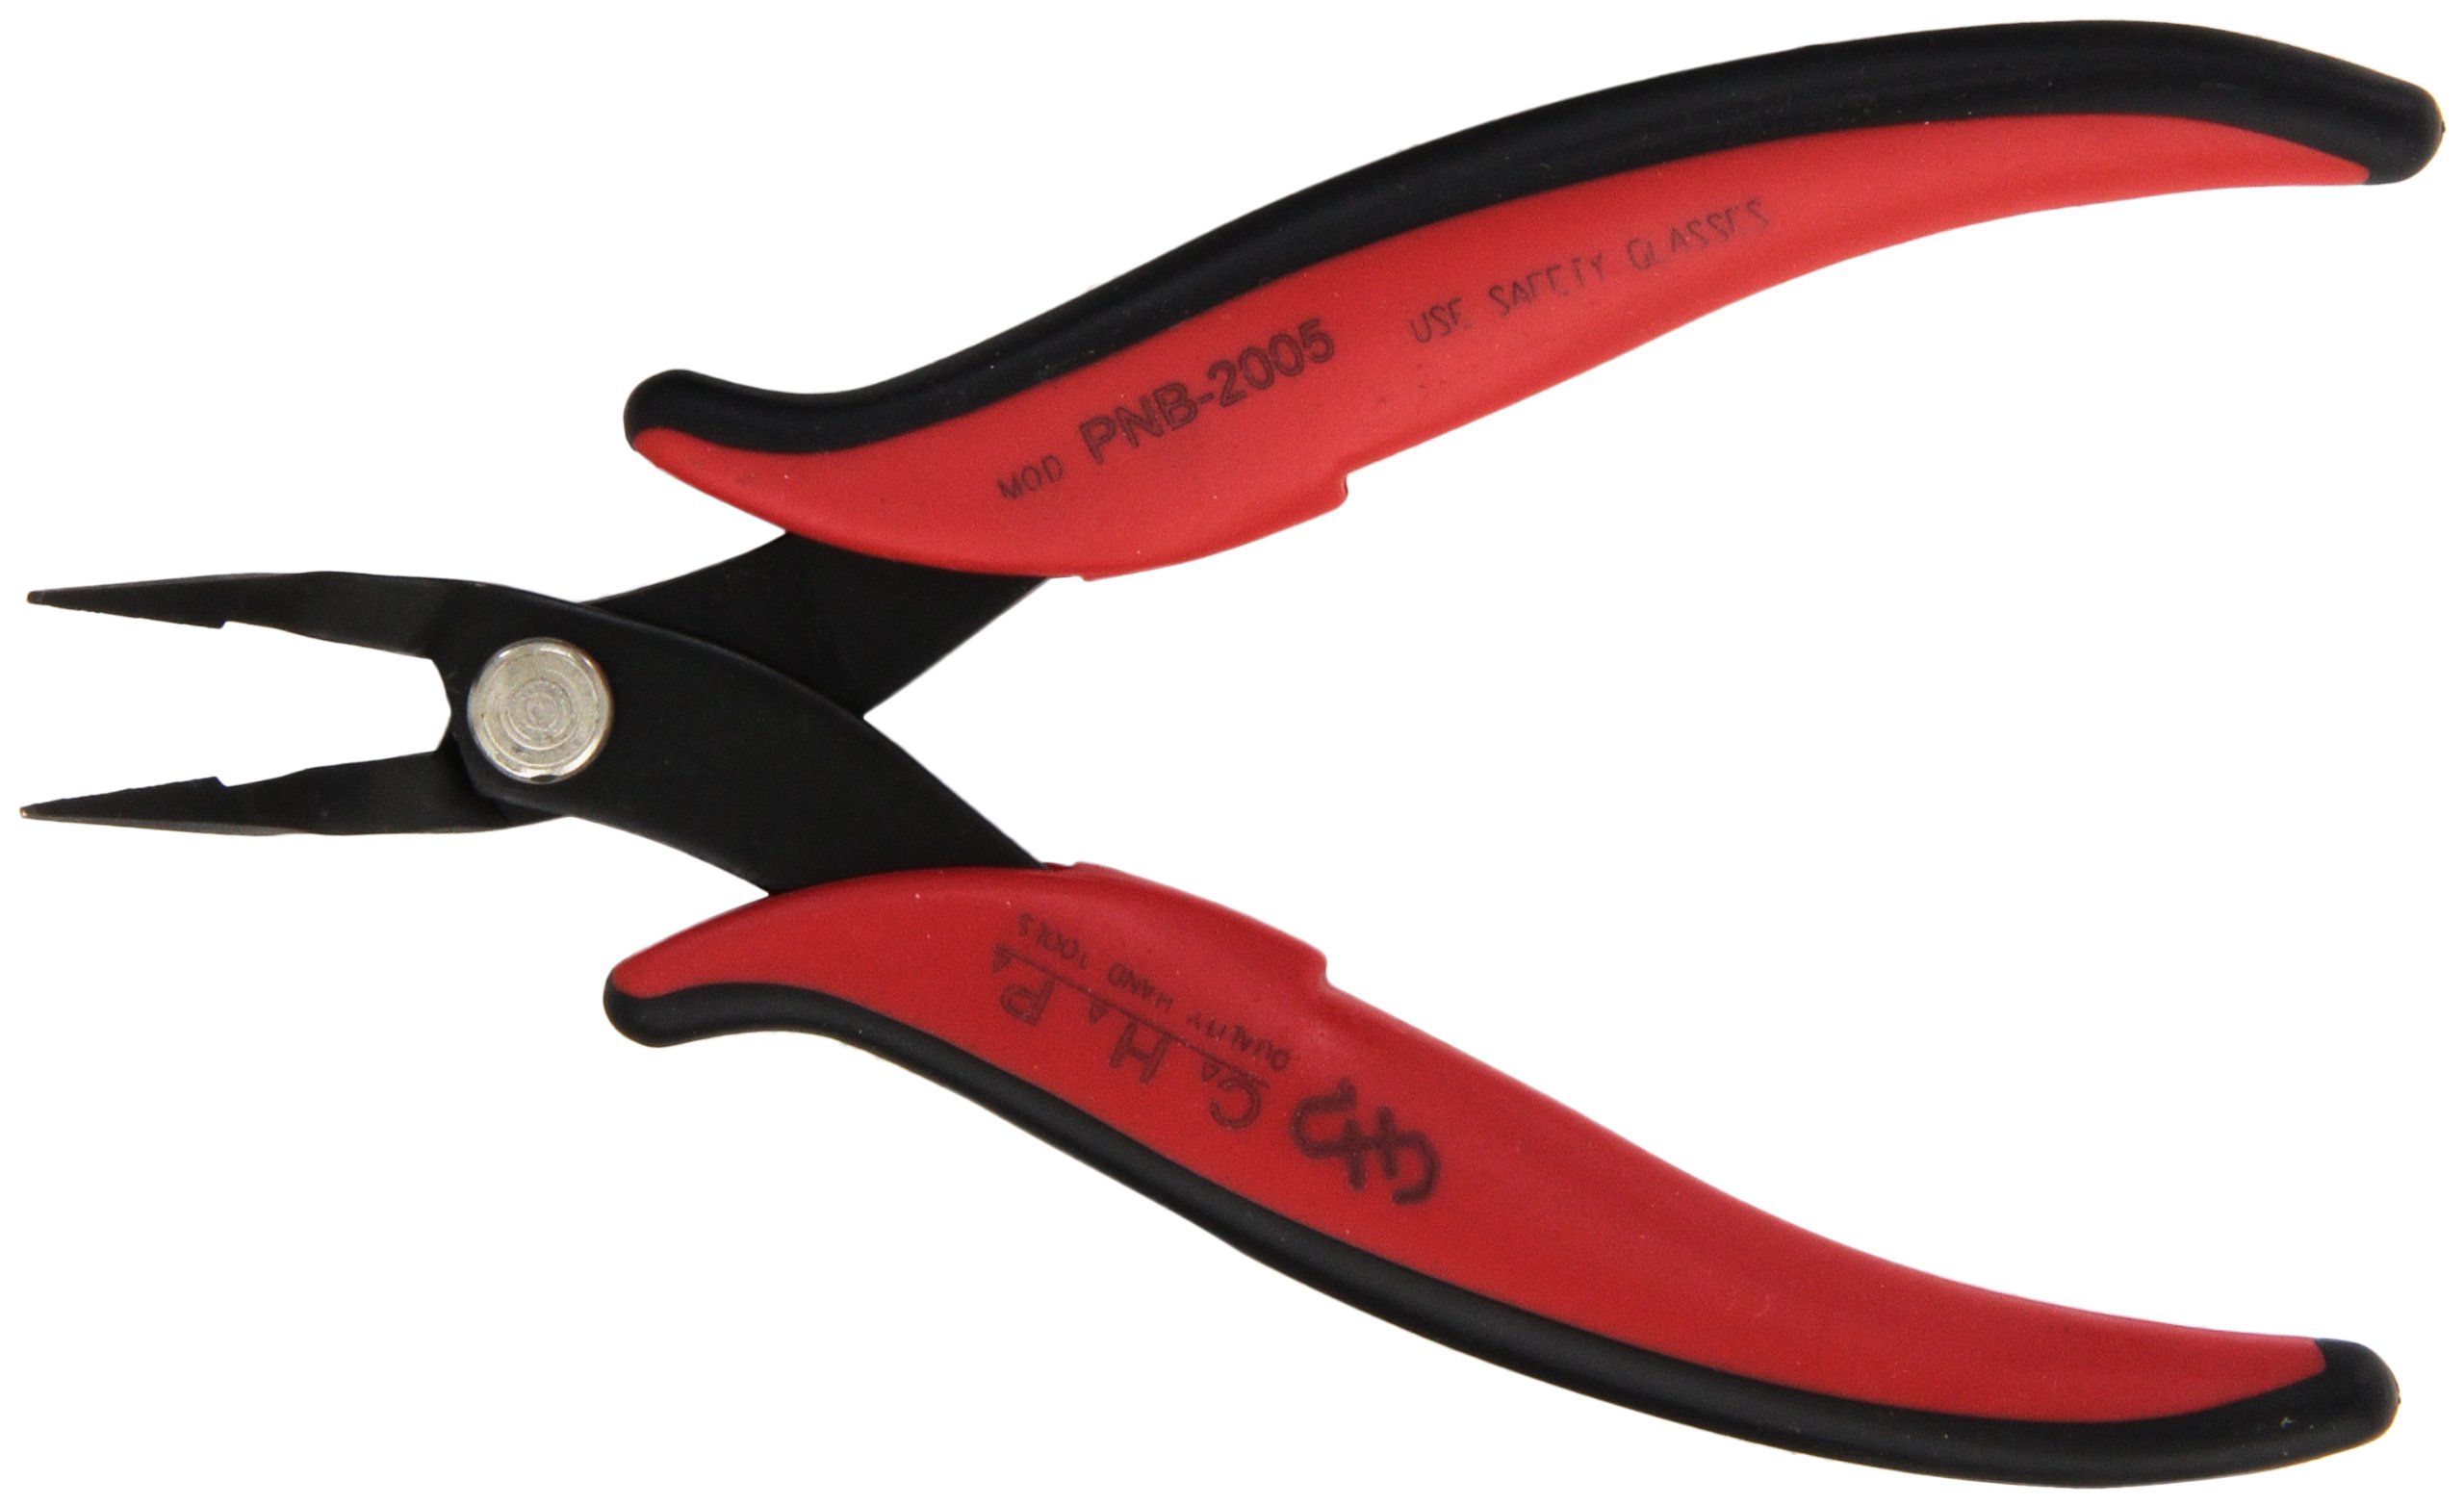 Hakko CHP PNB-2005 Long-Nose Angled Pliers, Pointed Nose, Flat Outside Edge, 45-Degree Angled Serrated Jaws, 32mm Jaw Length, 1.2mm Nose Width, 3mm Thick Steel